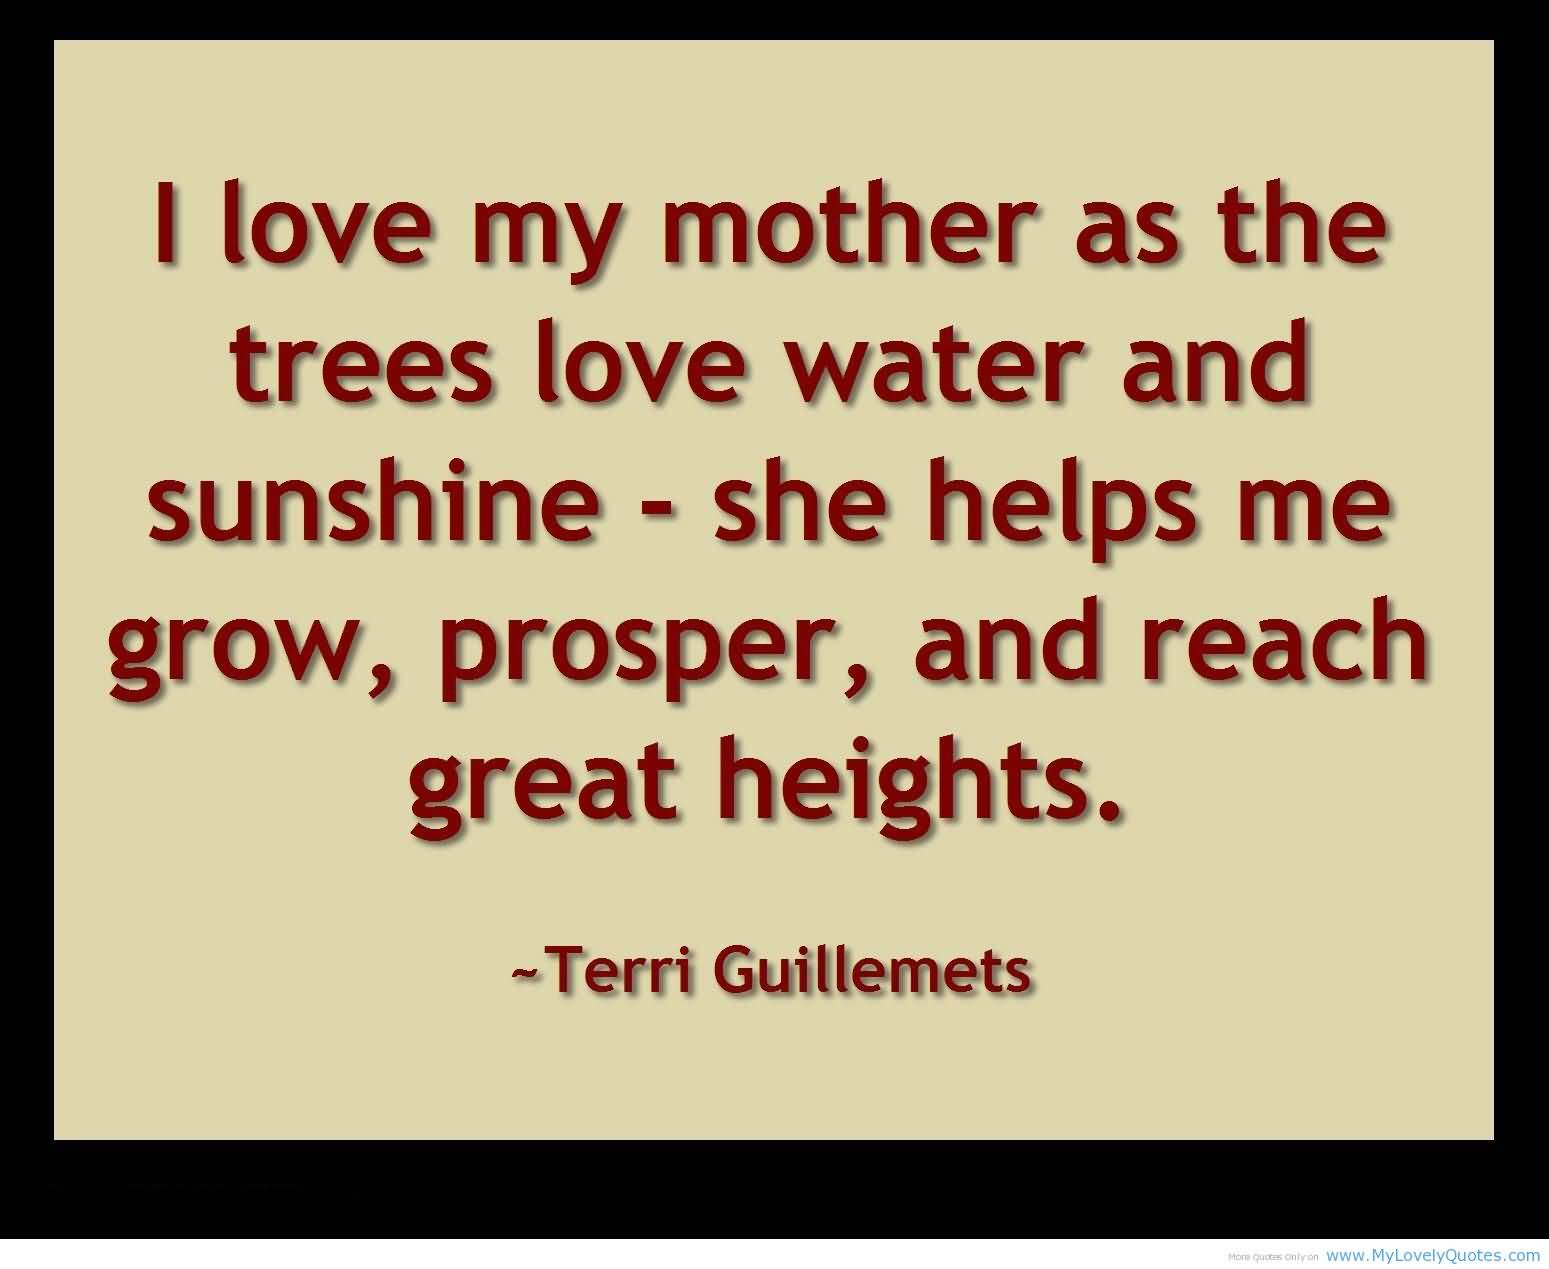 I love my mother as the trees love water and sunshine - she helps me grow, prosper, and reach great heights. Terri Guillemets